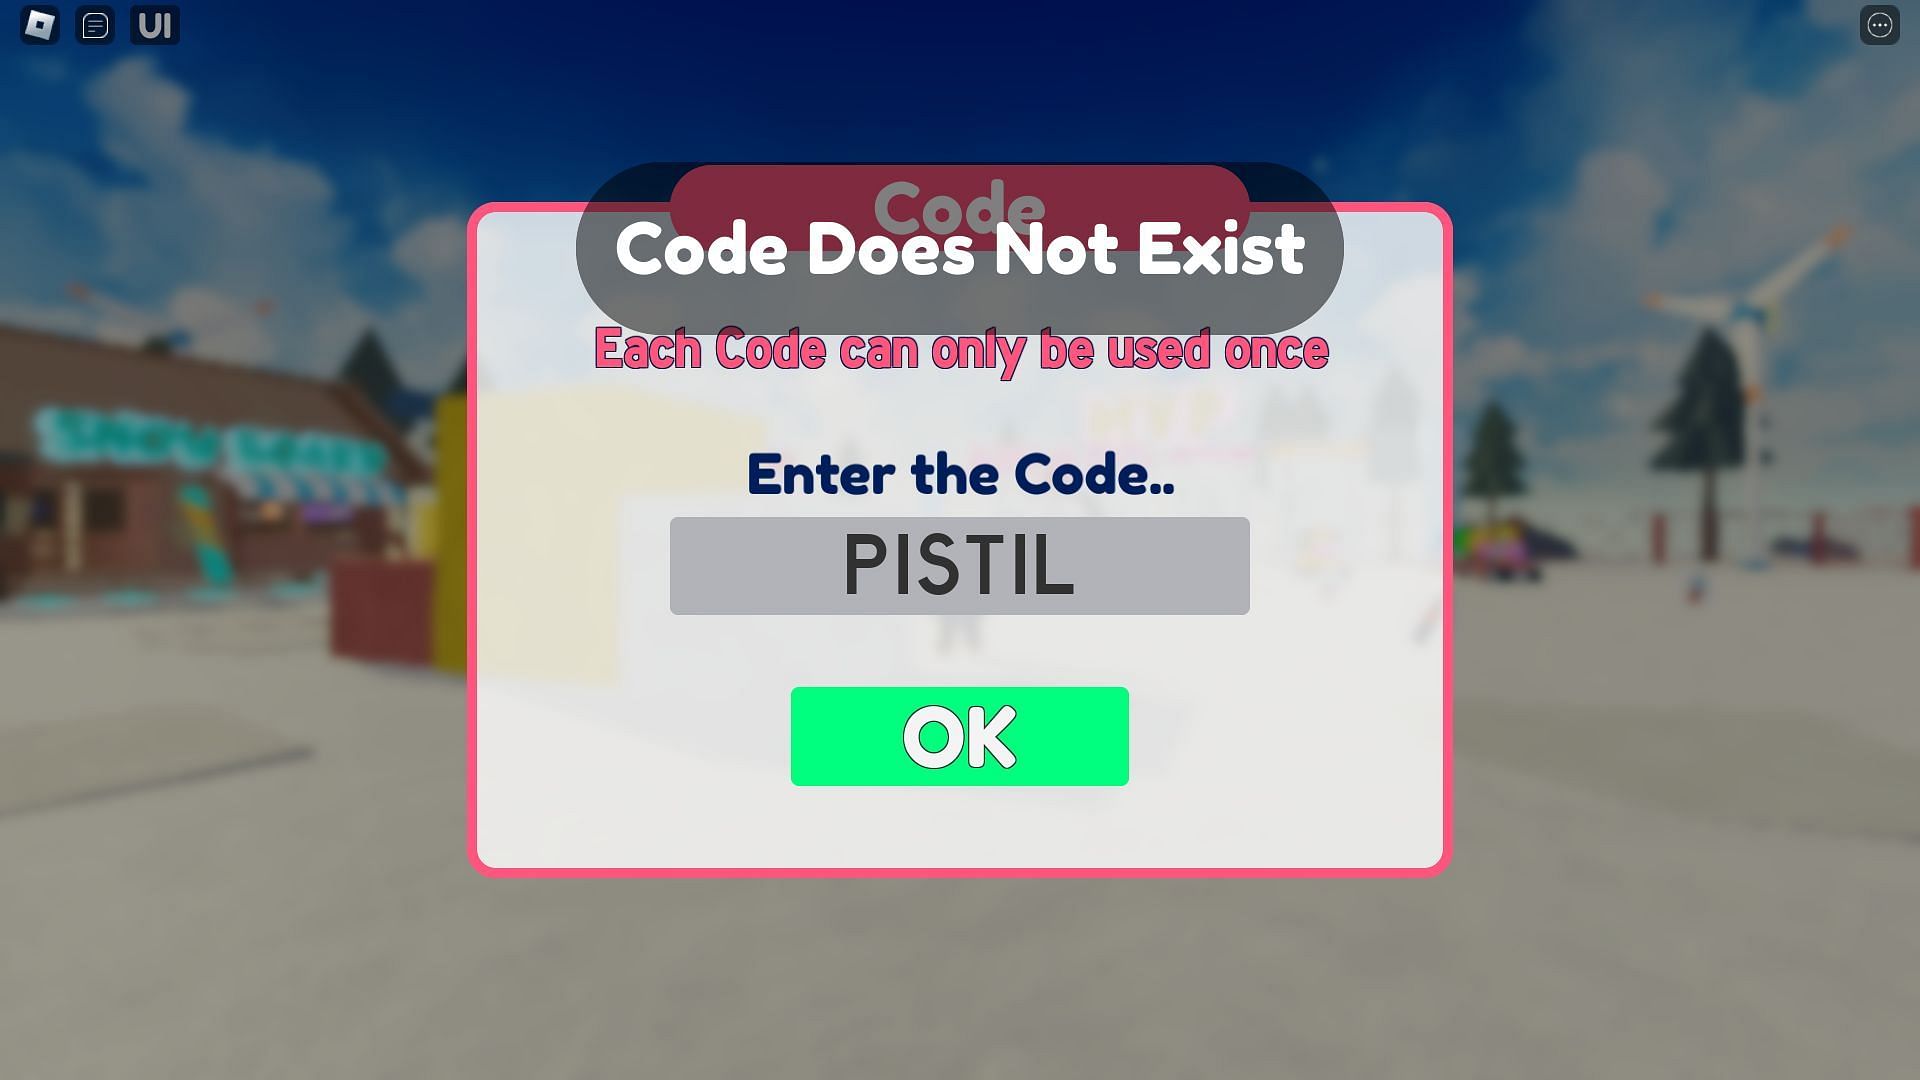 Troubleshooting codes for Ski Obby Race (Image via Roblox)